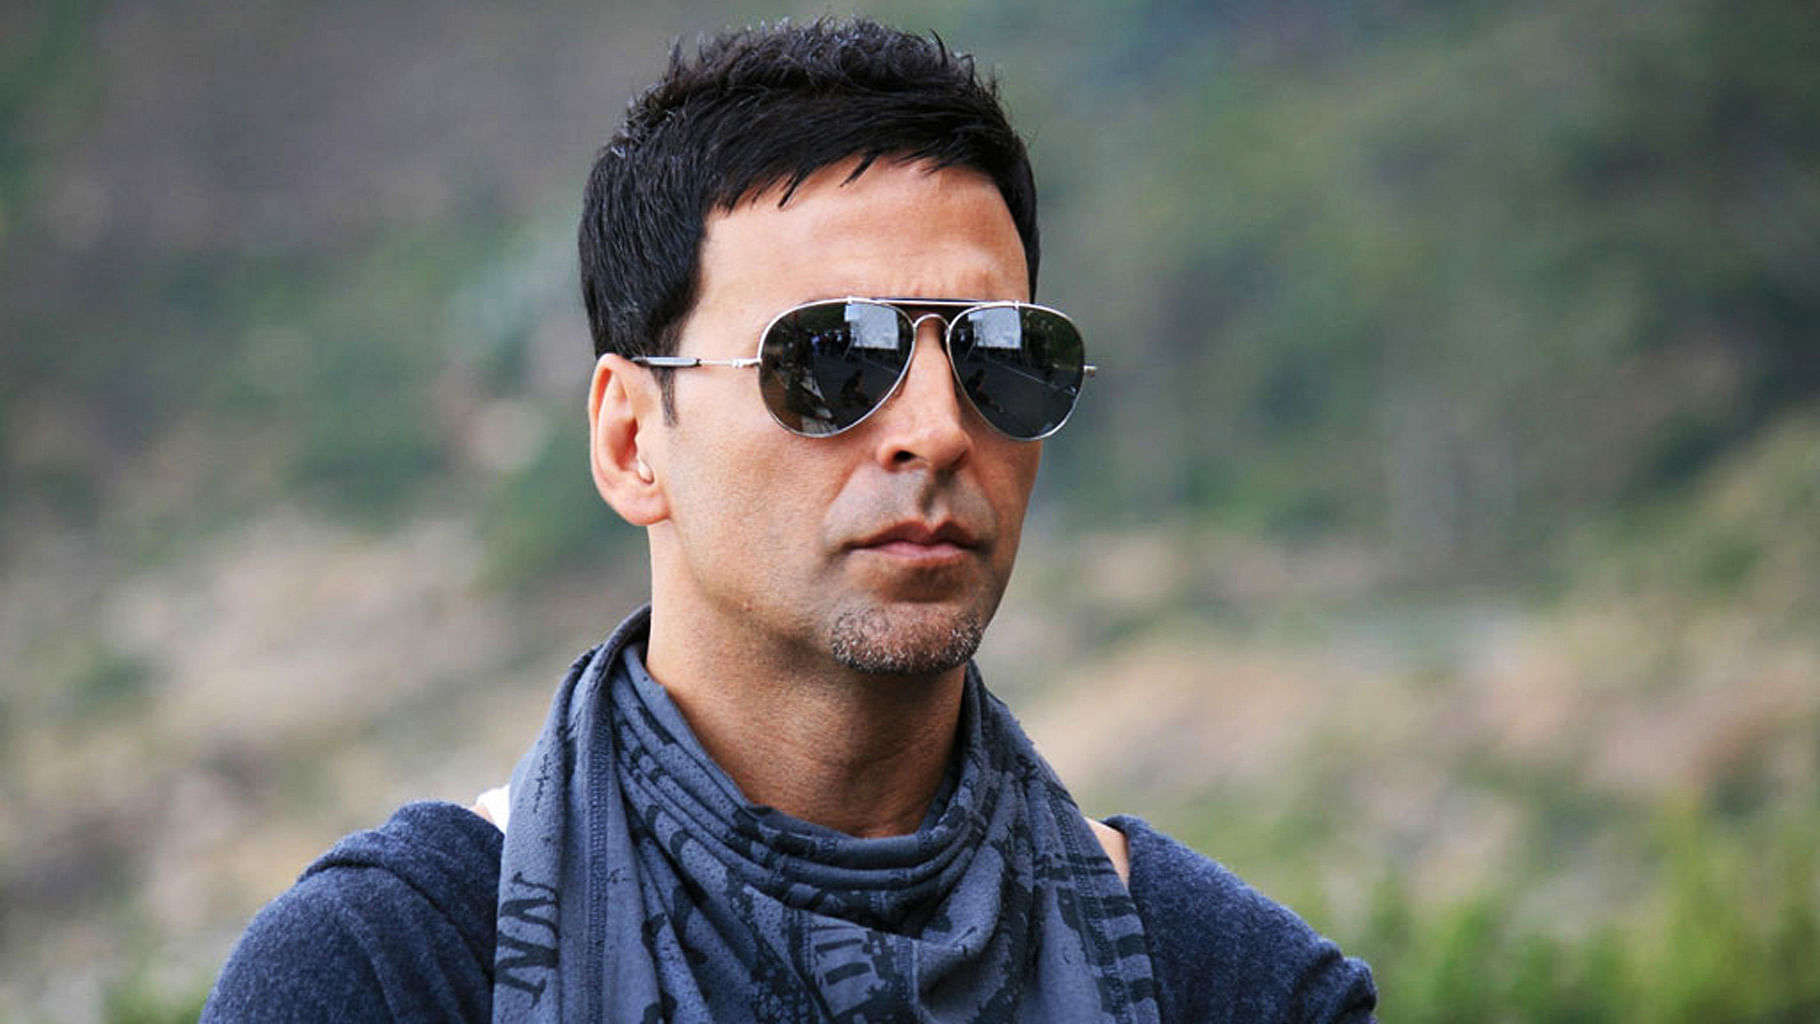 Akshay Kumar may play  Prithviraj Chauhan in an upcoming film based on the Indian king’s life.